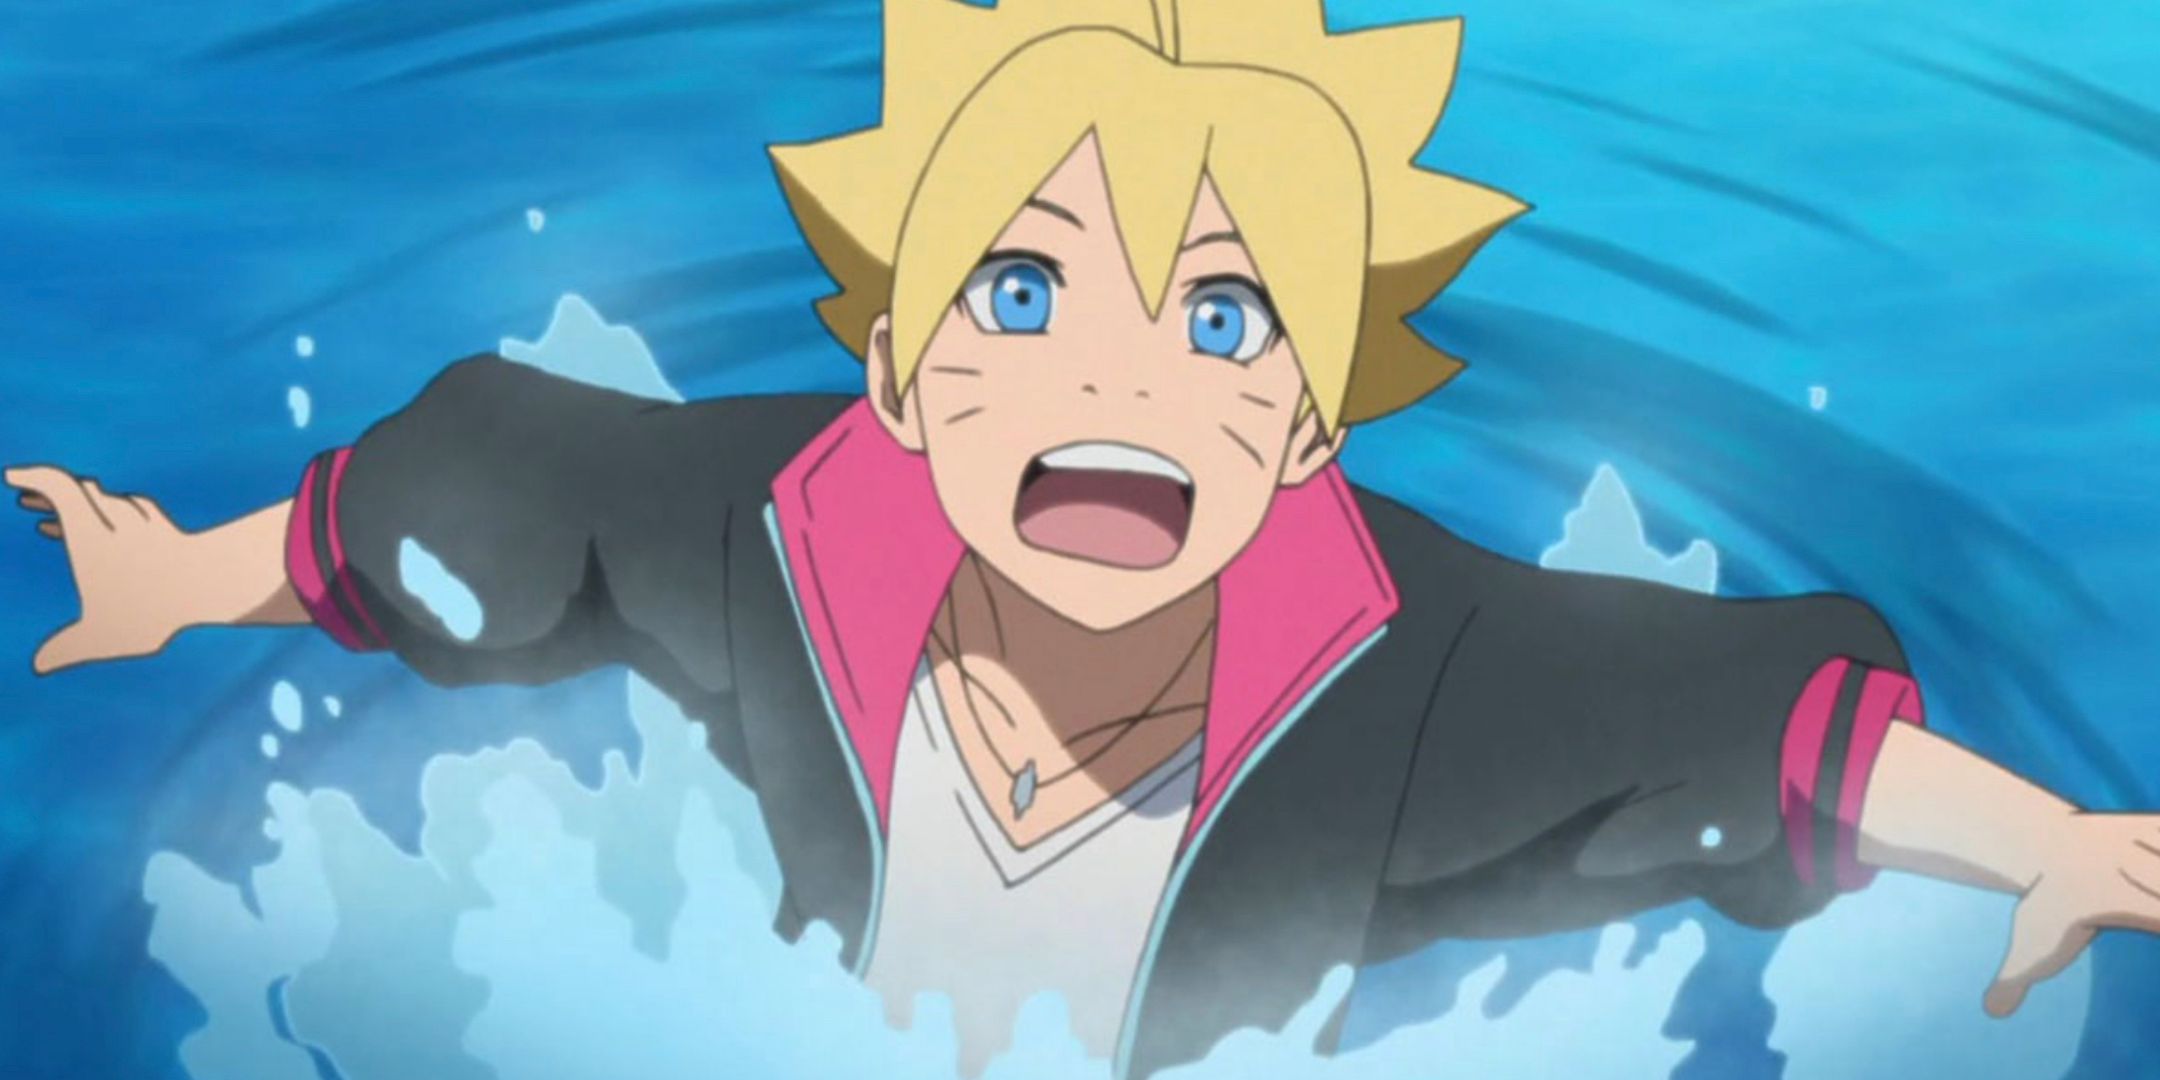 Boruto emerges from the water in the Boruto anime